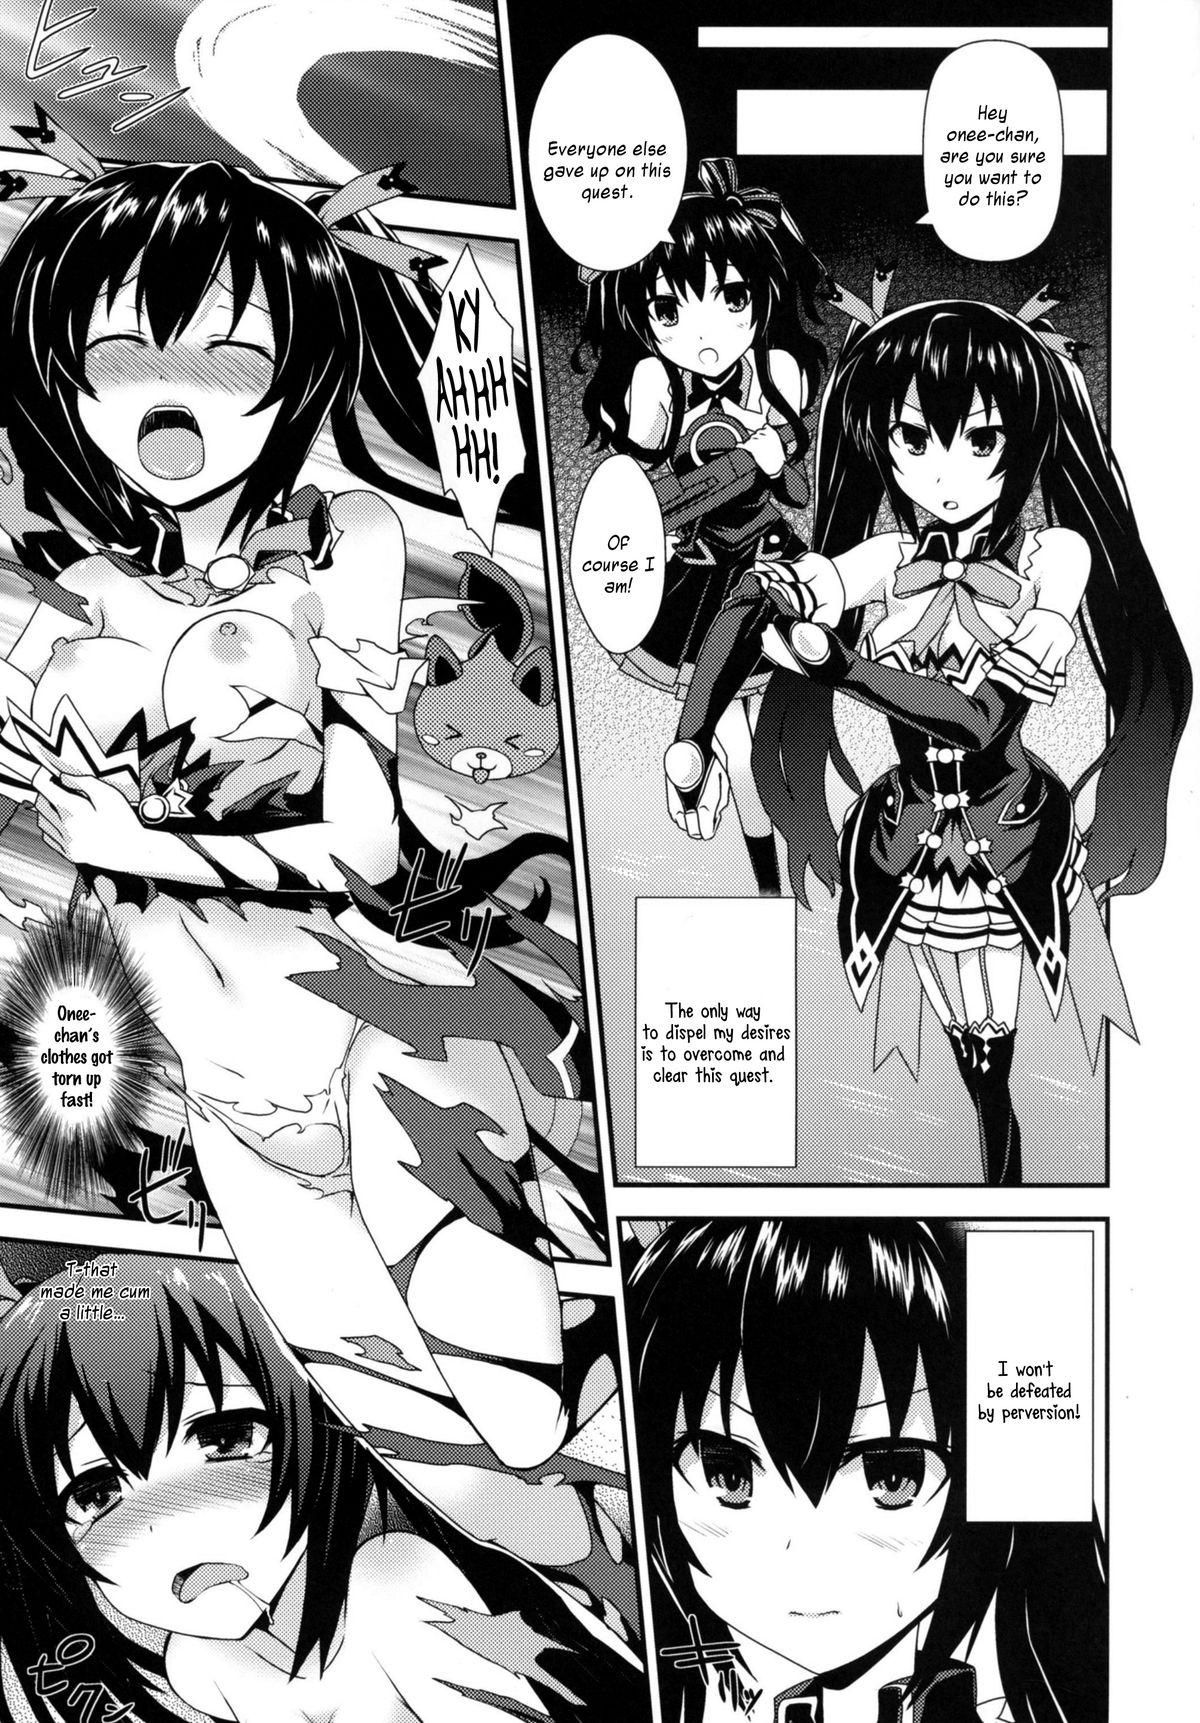 Stripping Inyoku no Sustain - Sustain of Lust - Hyperdimension neptunia Thylinh - Page 6